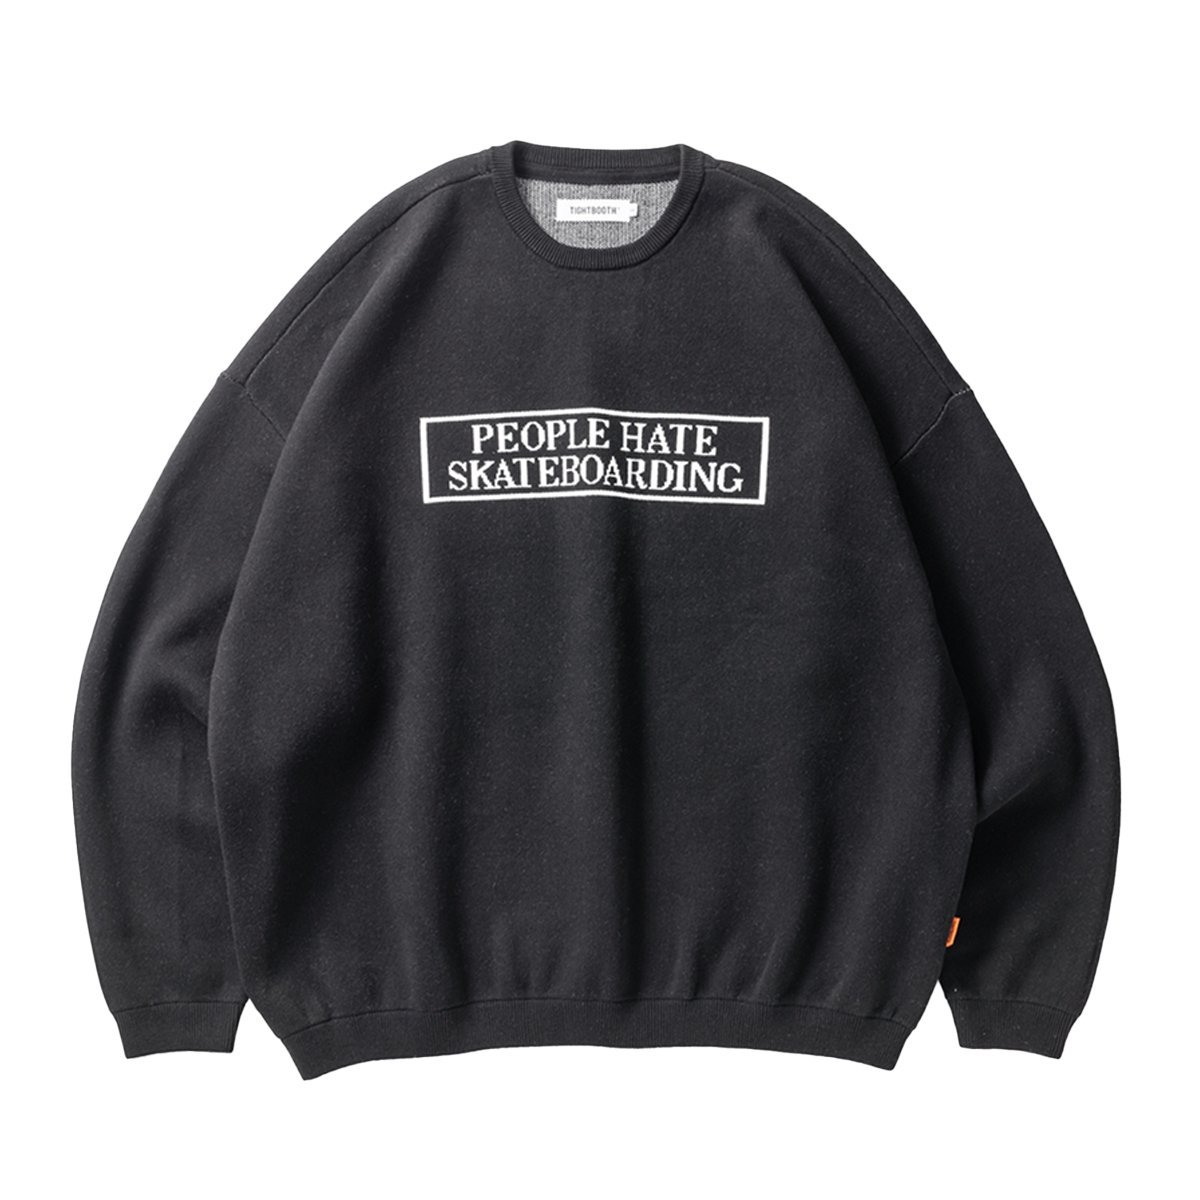 <img class='new_mark_img1' src='https://img.shop-pro.jp/img/new/icons8.gif' style='border:none;display:inline;margin:0px;padding:0px;width:auto;' />TIGHTBOOTHPeople Hate Skate Sweater (Black)
                          </a>
            <span class=